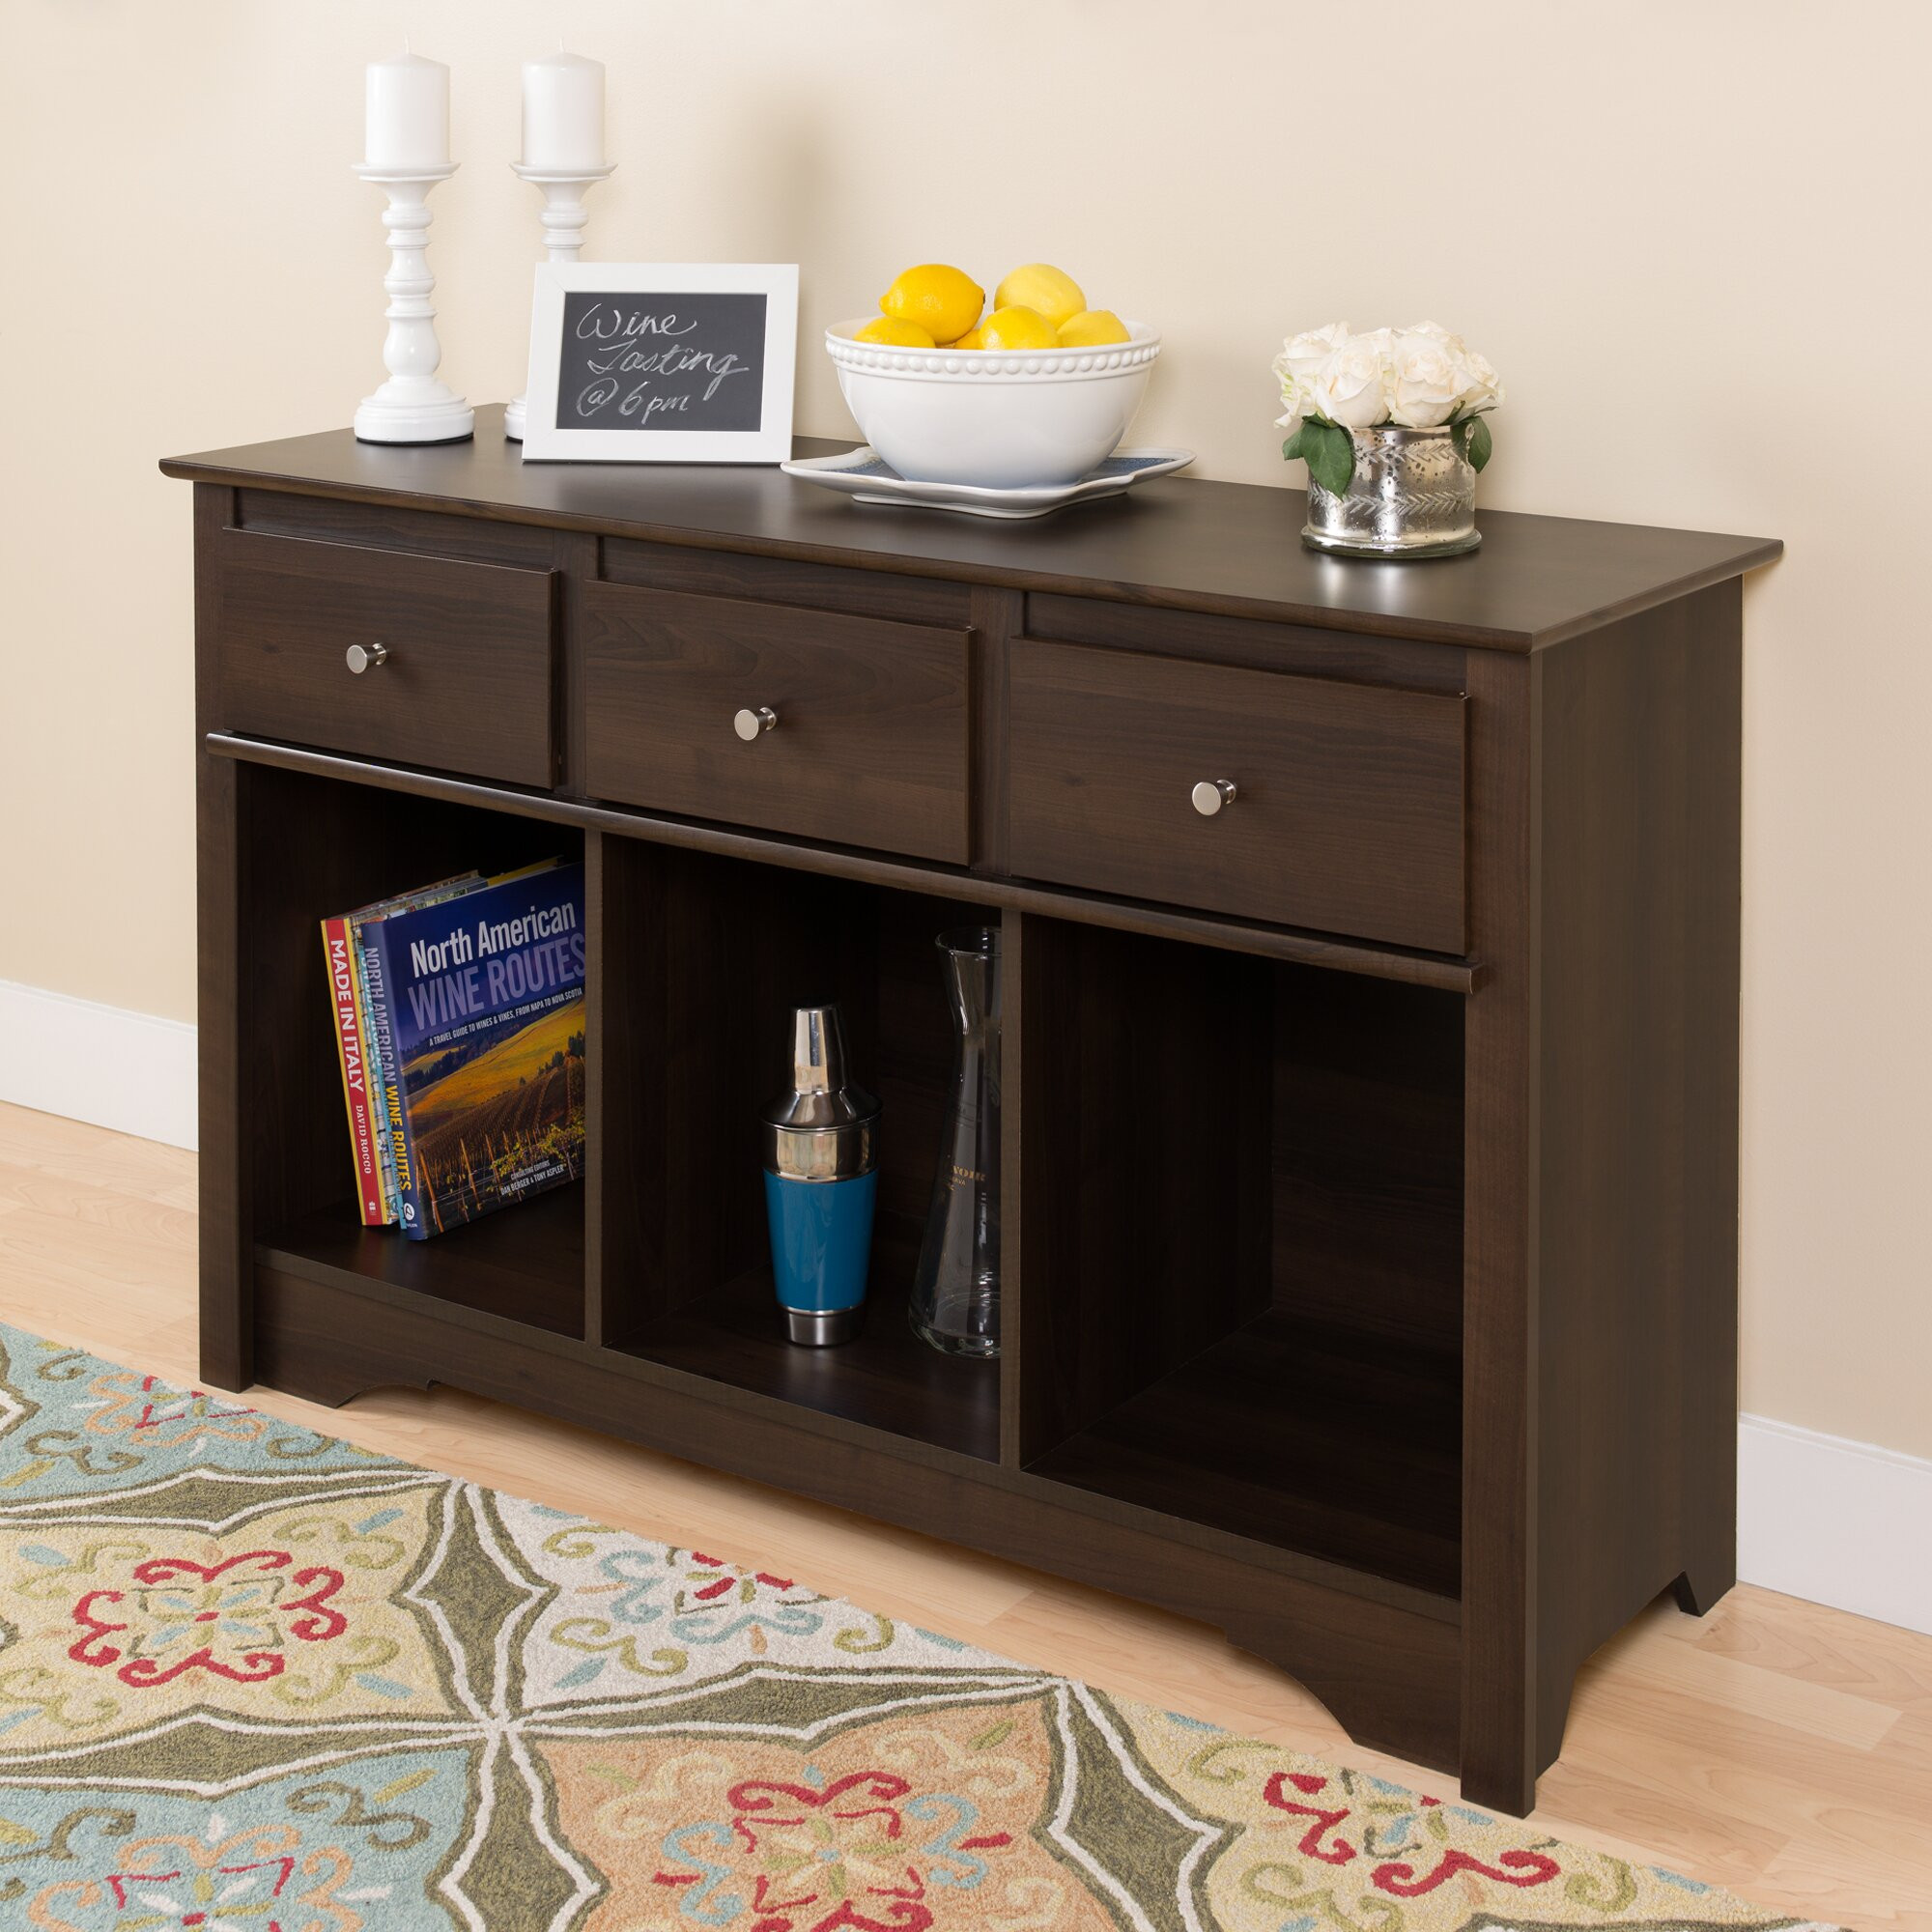 Living Room Console Table
 Prepac Living Room 3 Drawer Console Table & Reviews